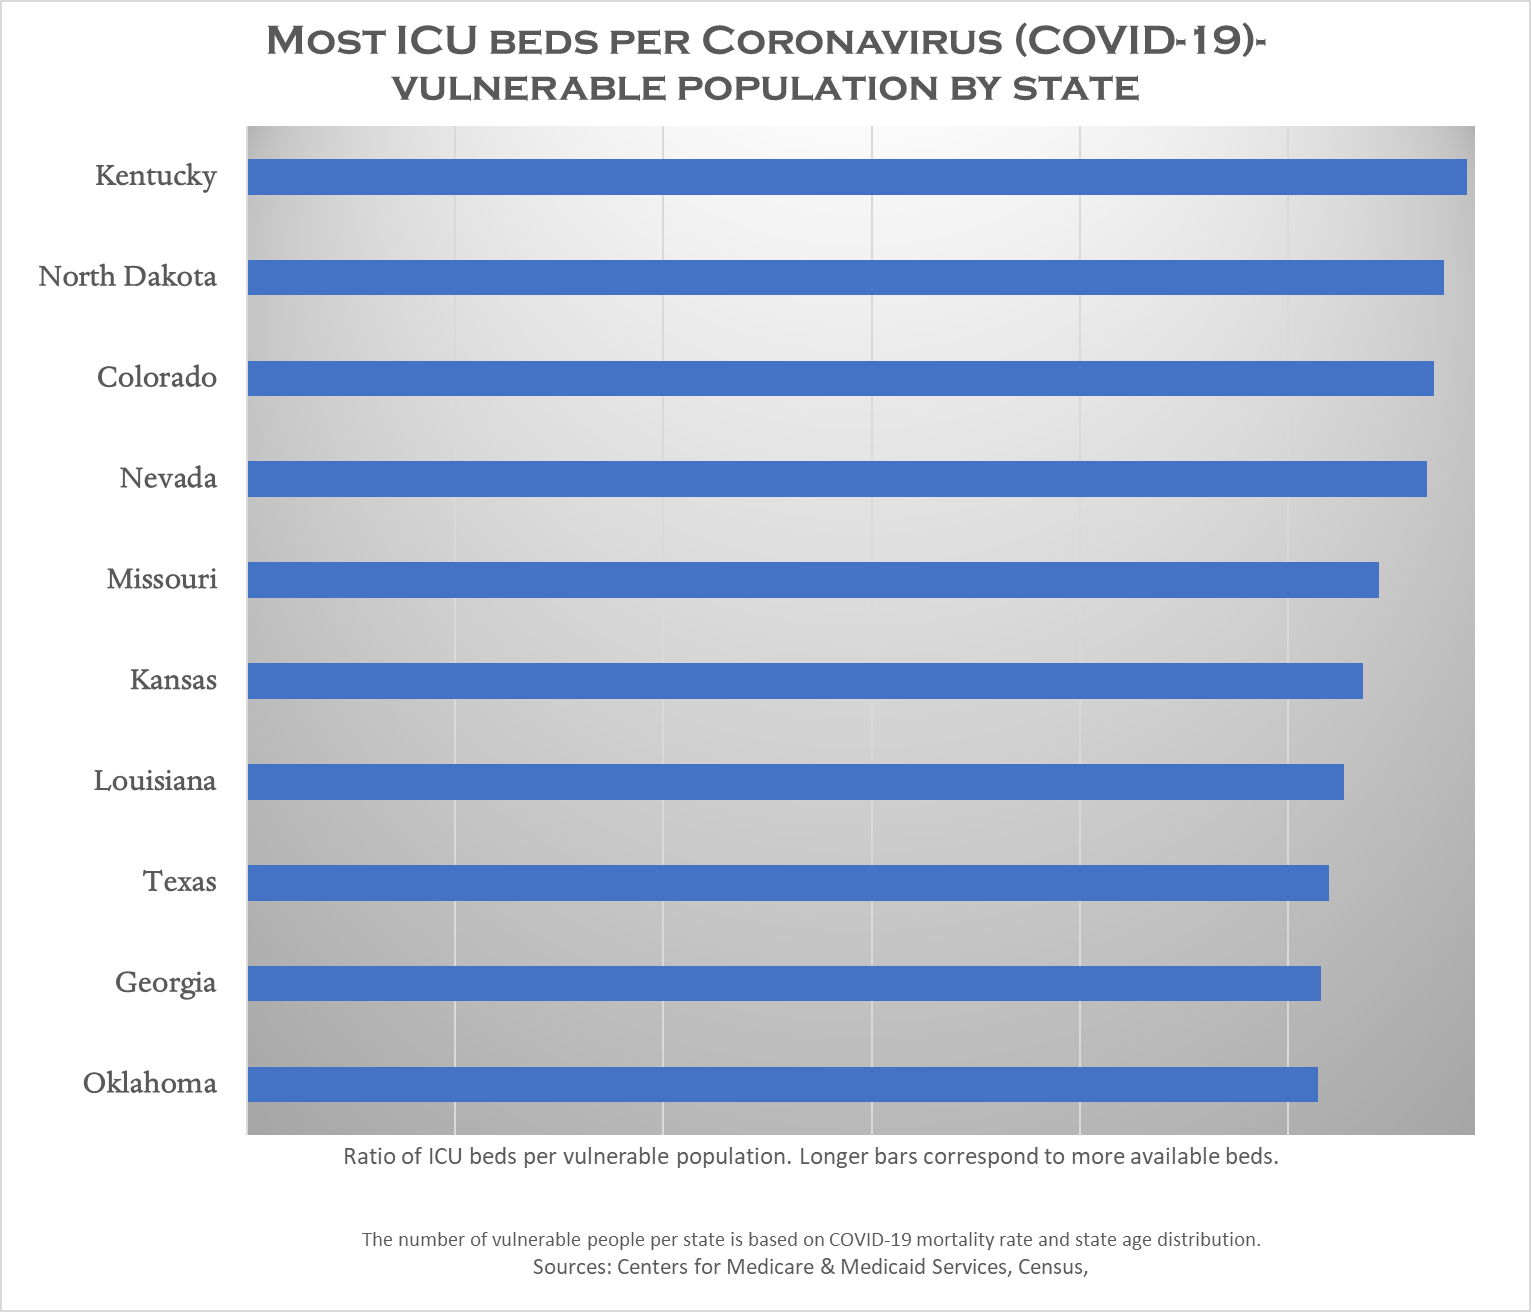 States that have proportionally the most available Intensive Care Unit (ICU) beds for Coronavirus-vulnerable population